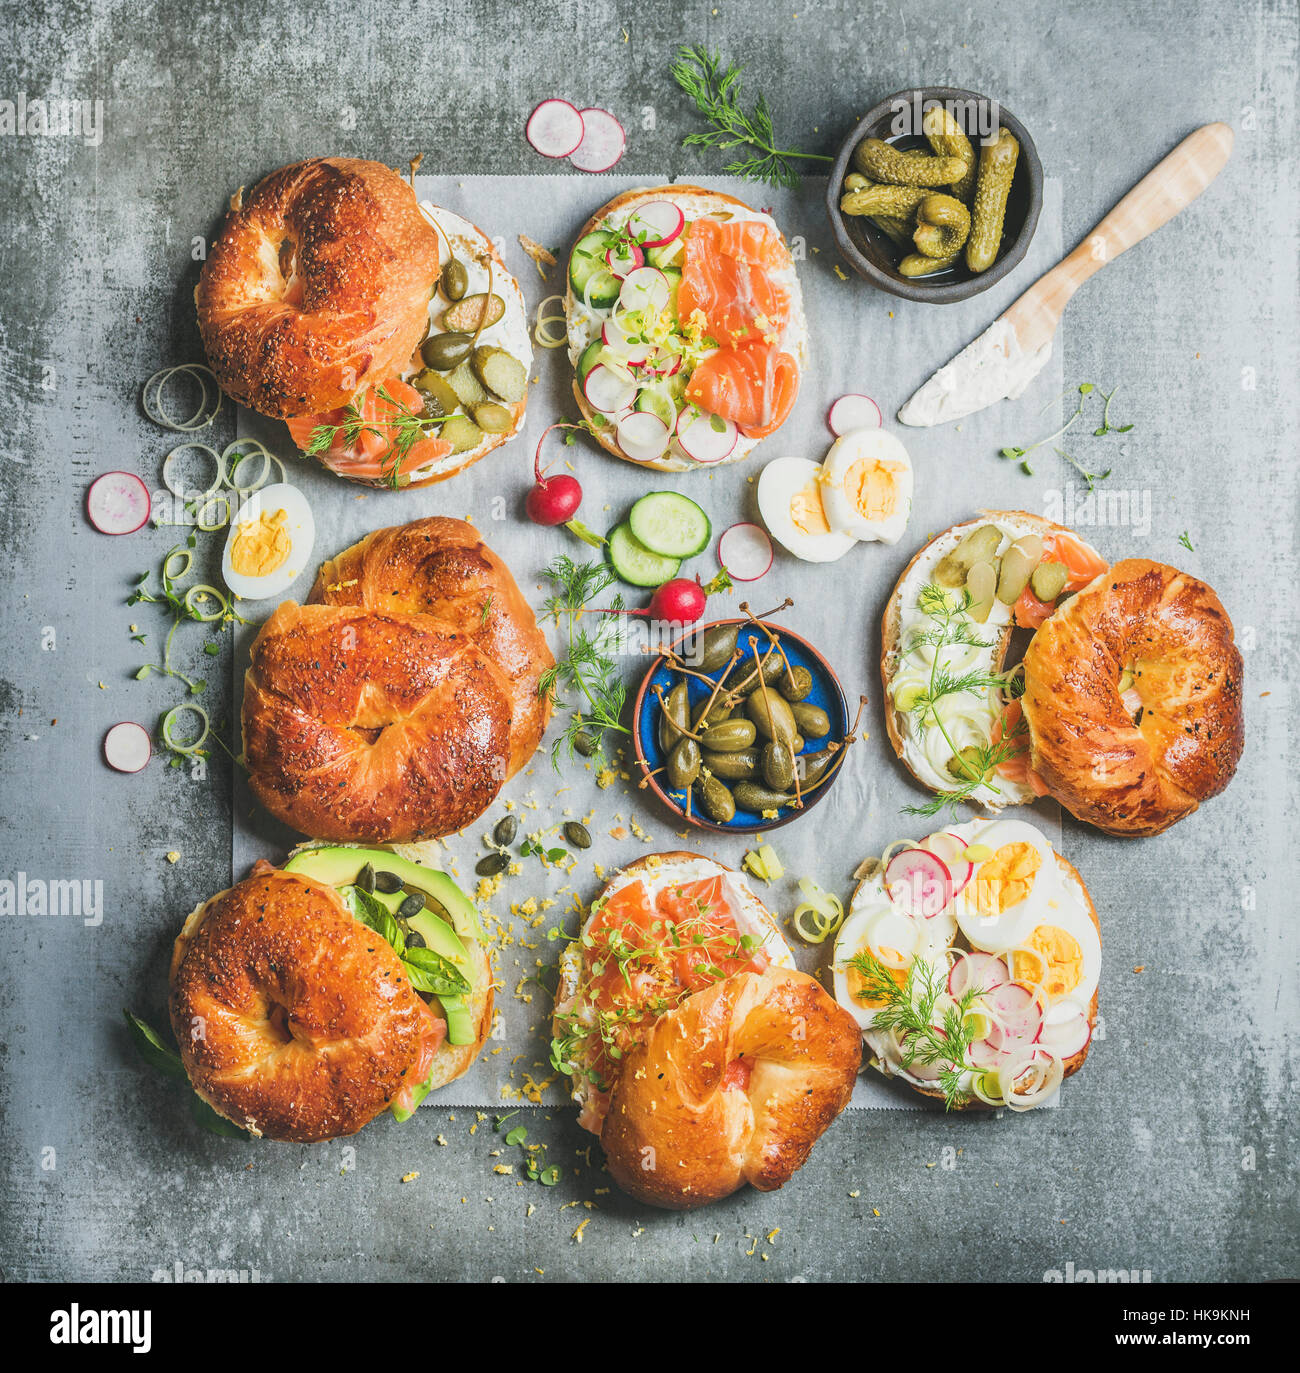 Variety of bagels with smoked salmon, eggs, radish, avocado, cucumber, greens and cream cheese for breakfast, healthy lunch or party over grey concret Stock Photo